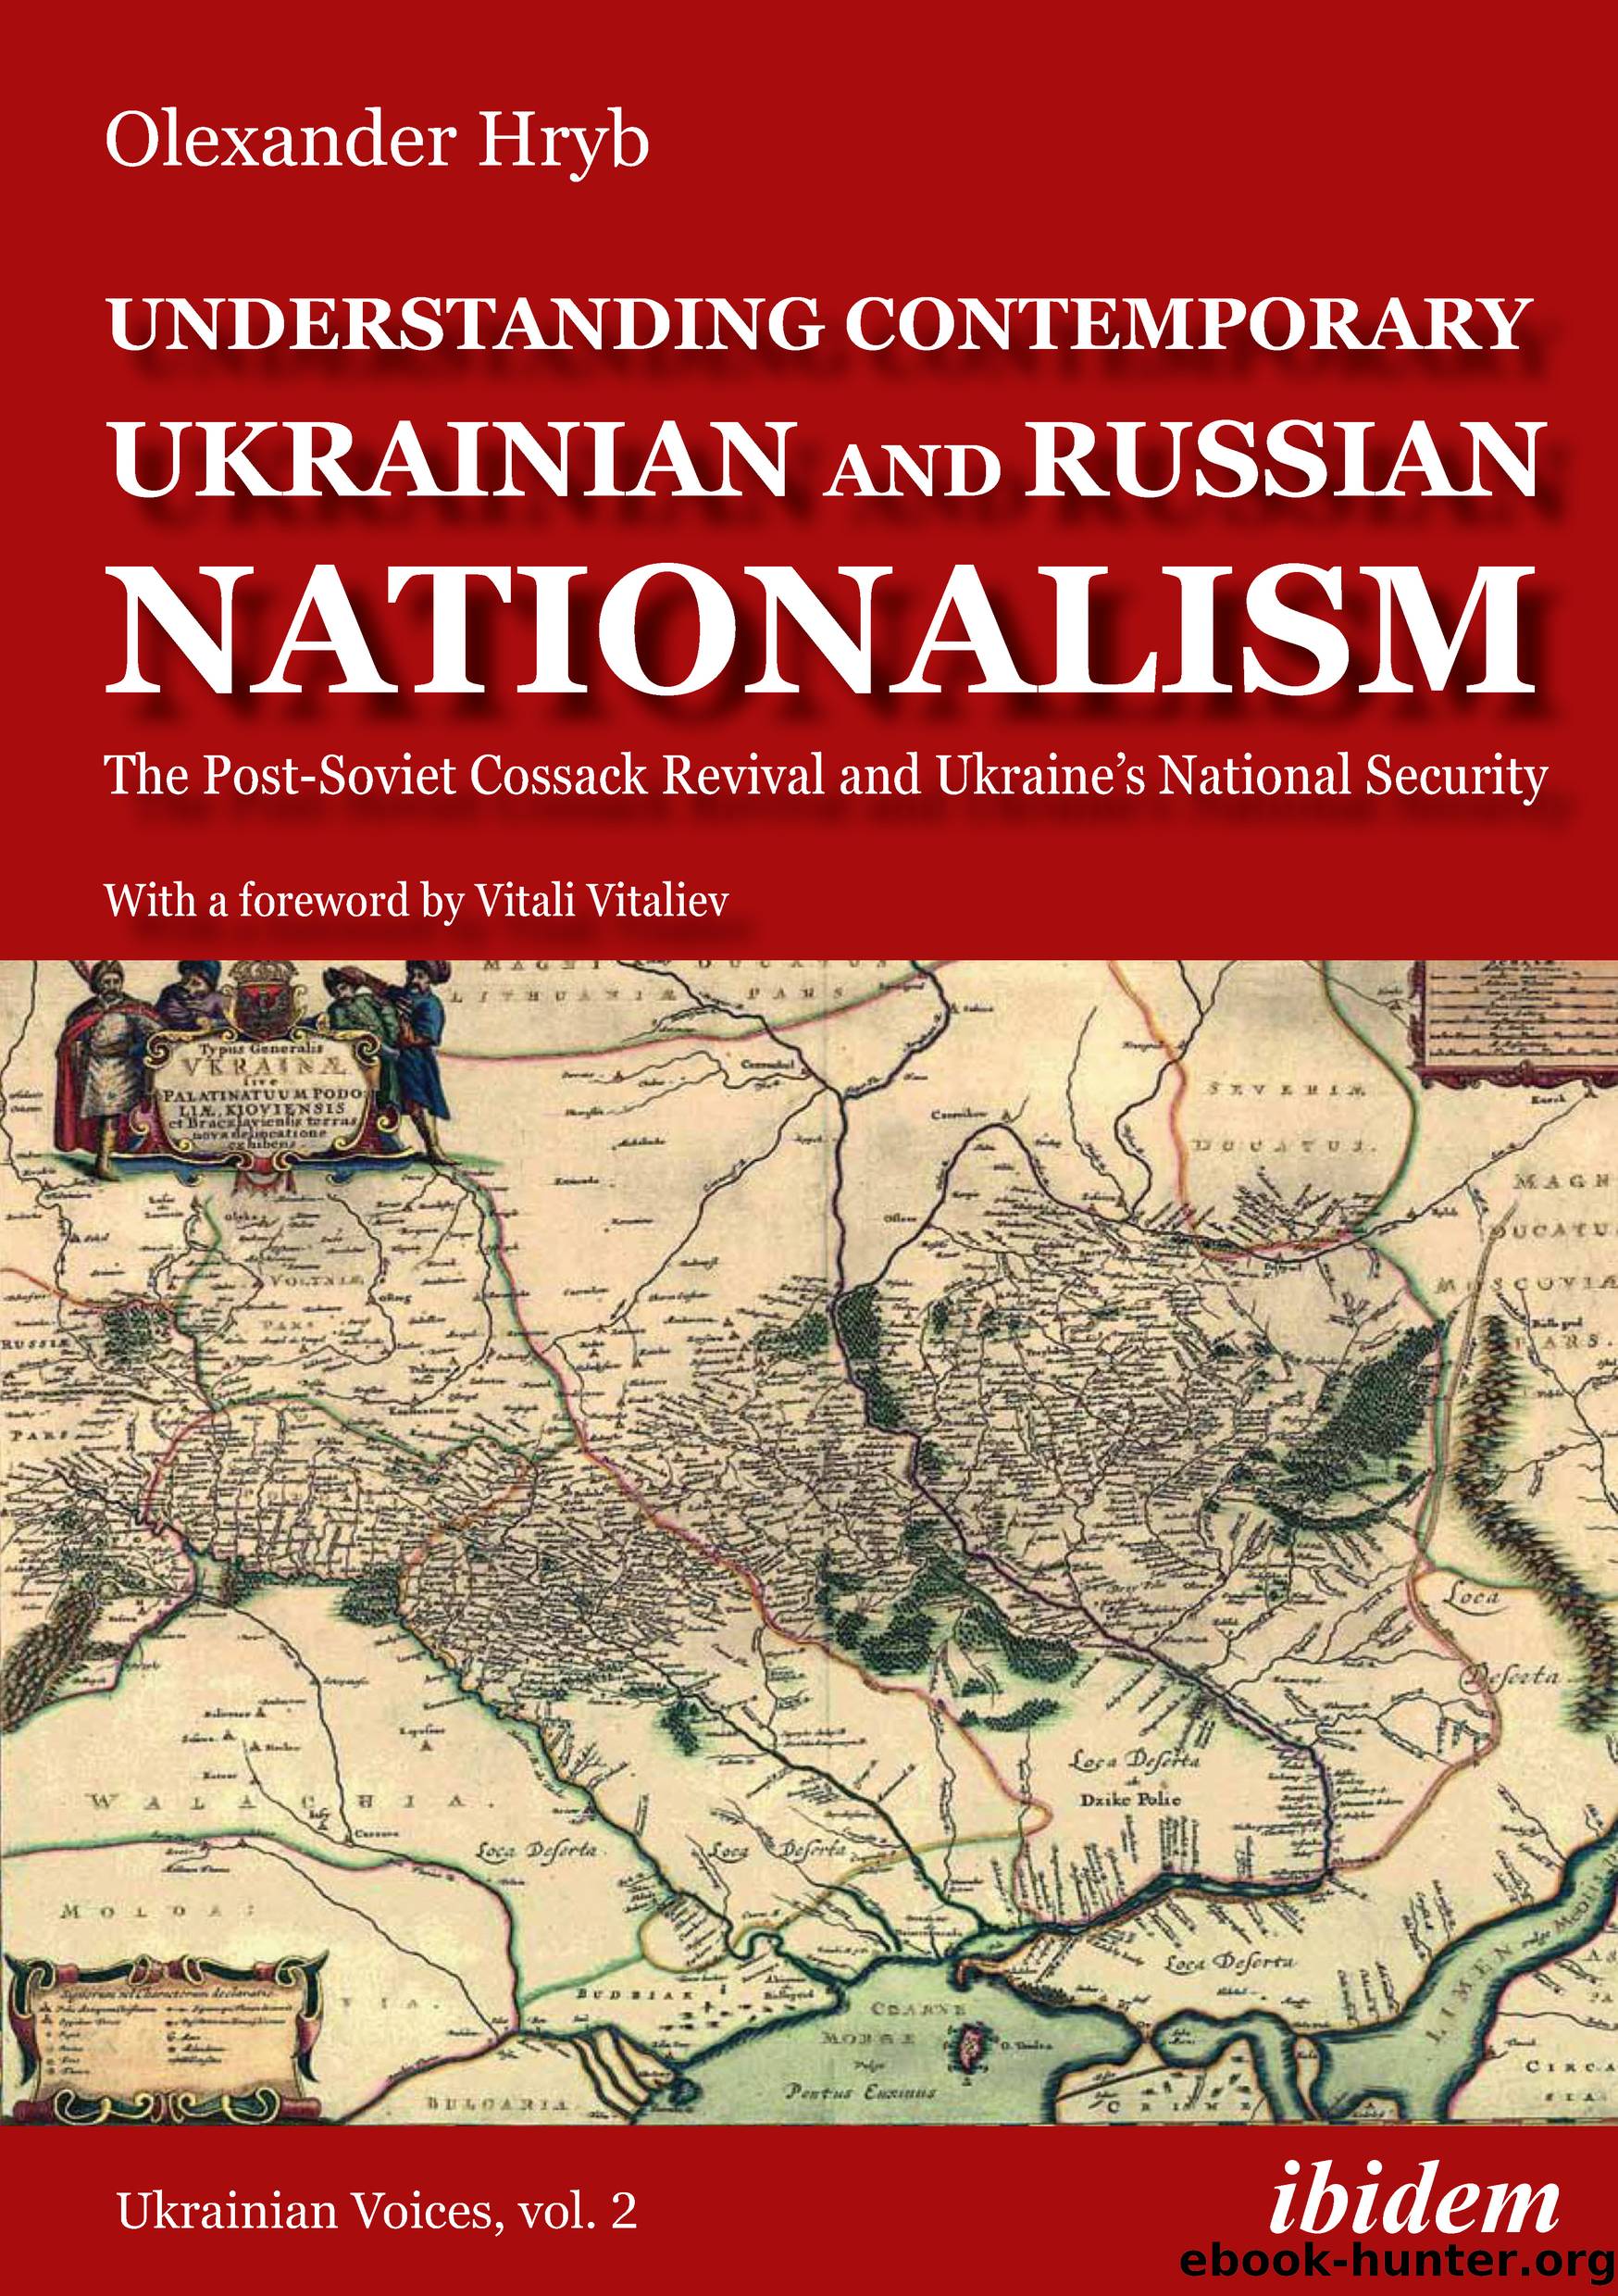 Understanding Contemporary Ukrainian and Russian Nationalism by Olexander Hryb